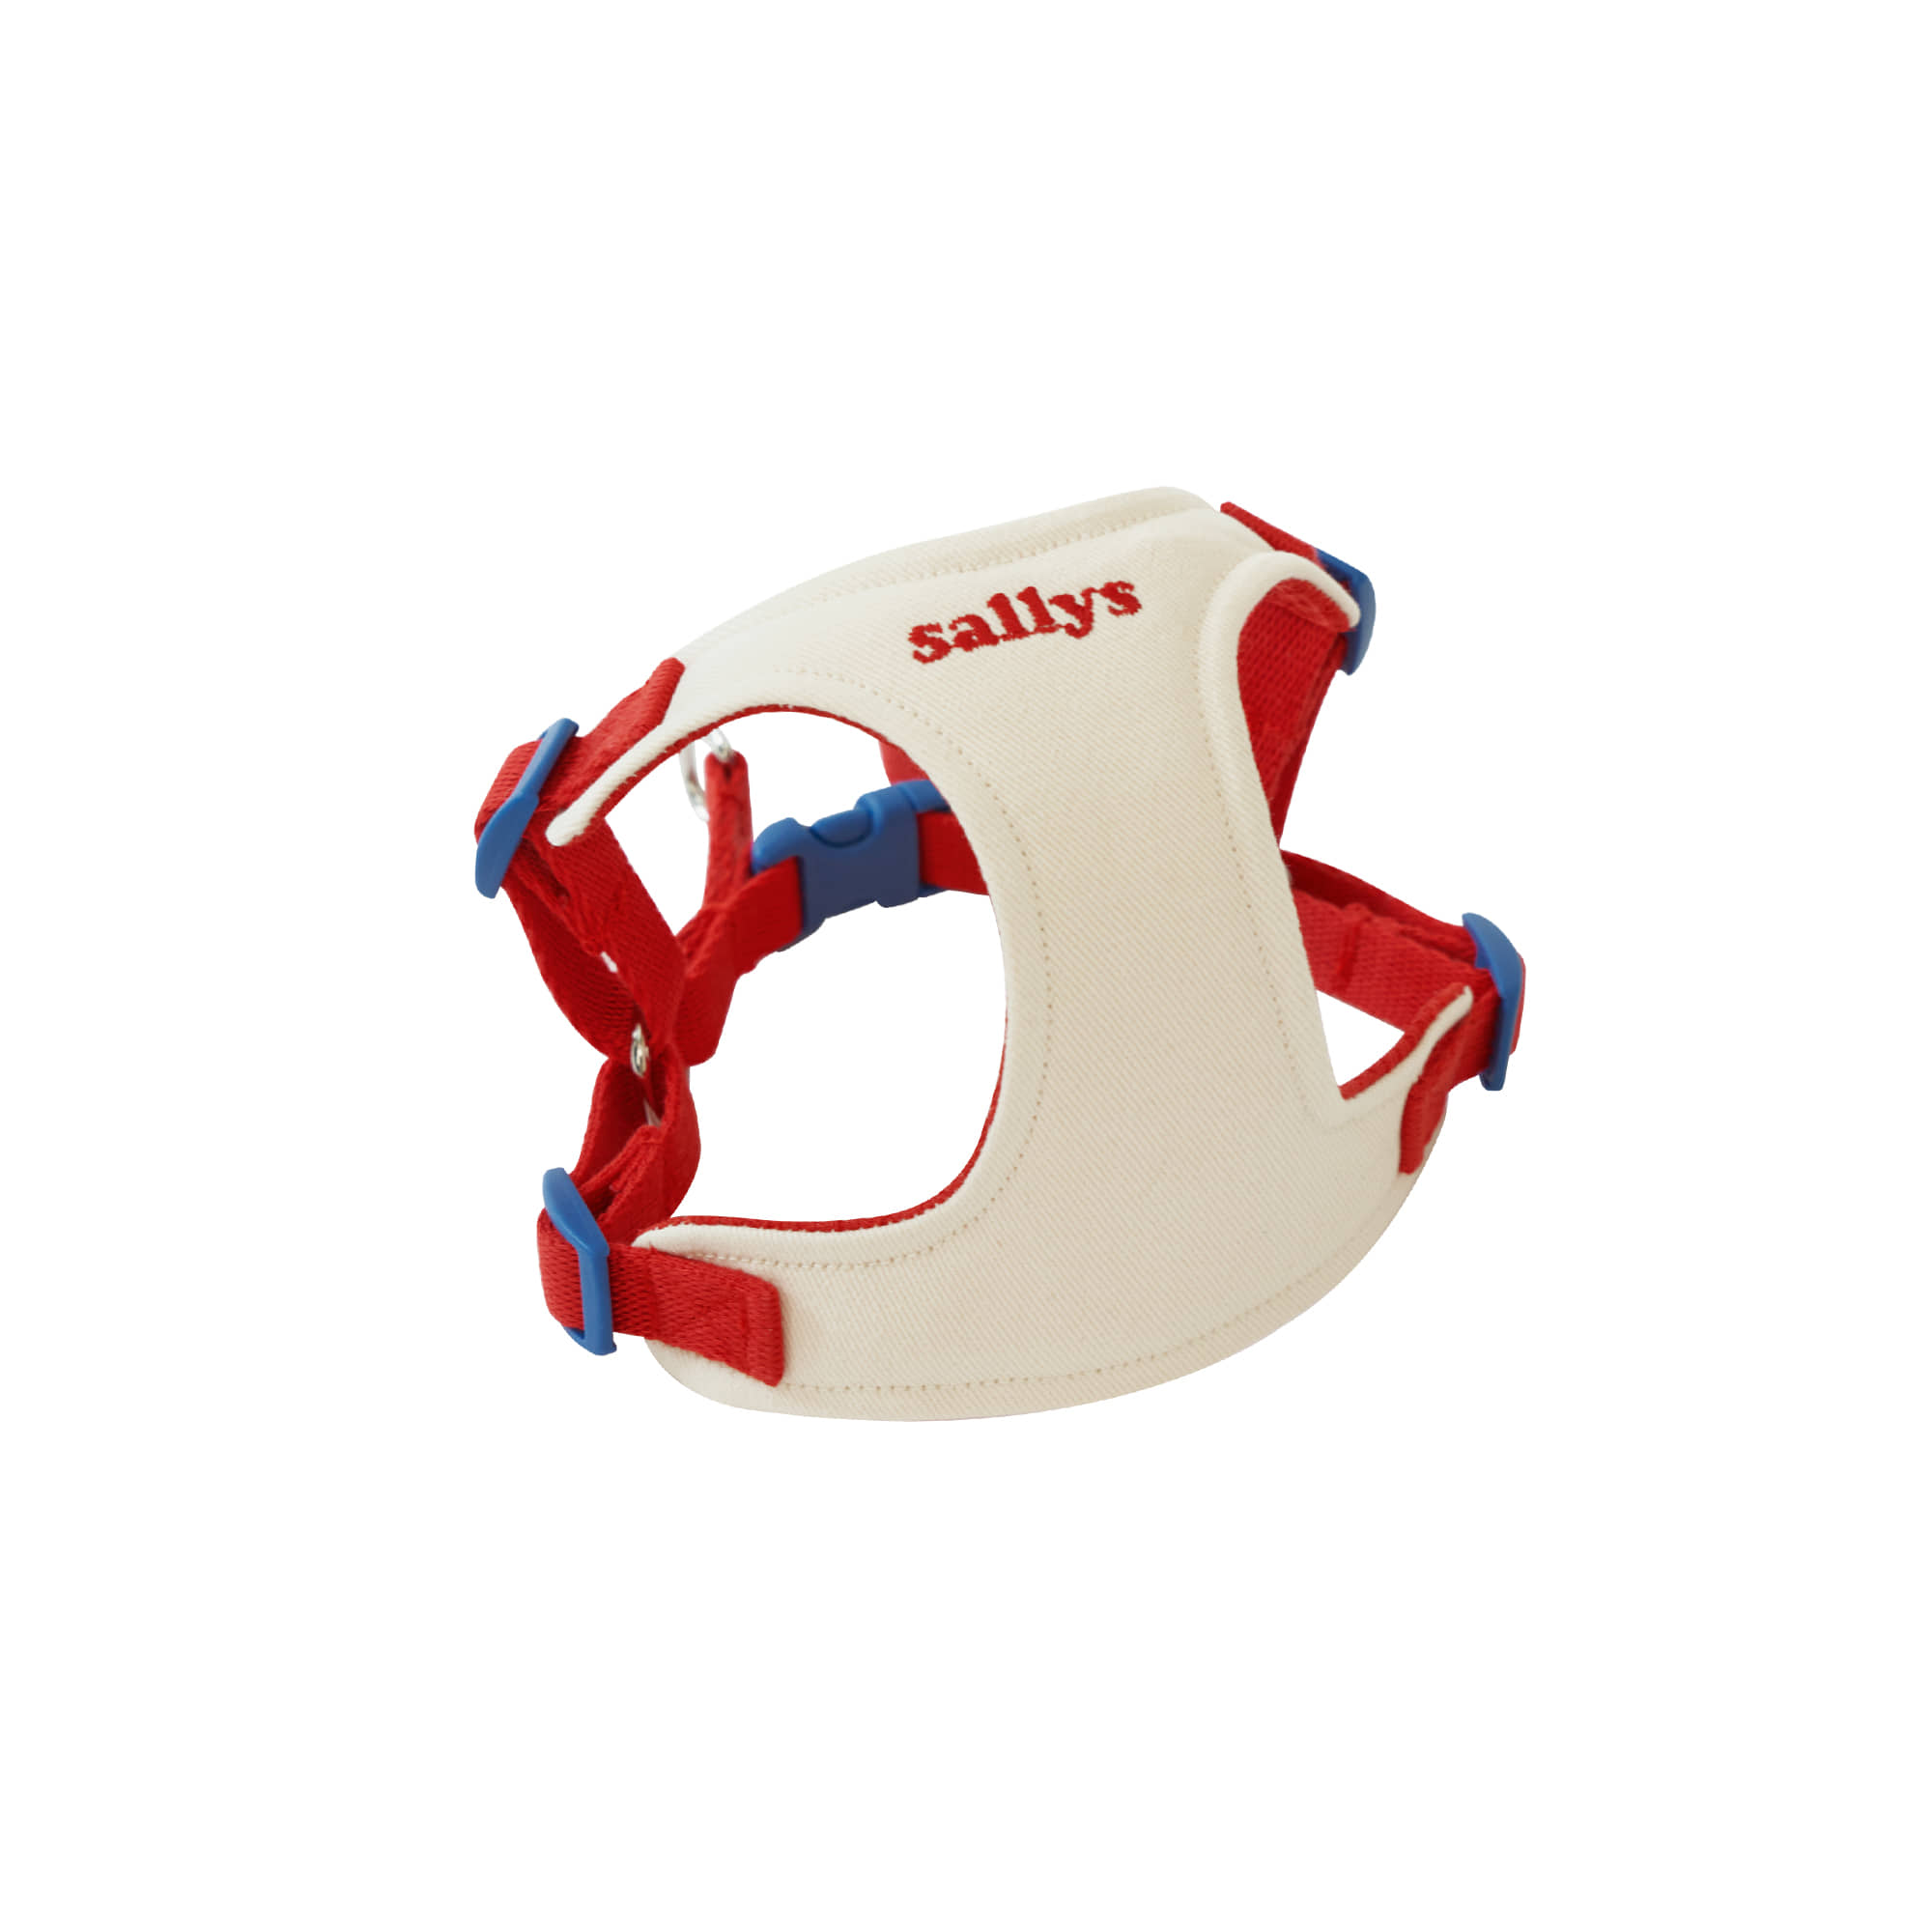 High teen X type harness (Red)